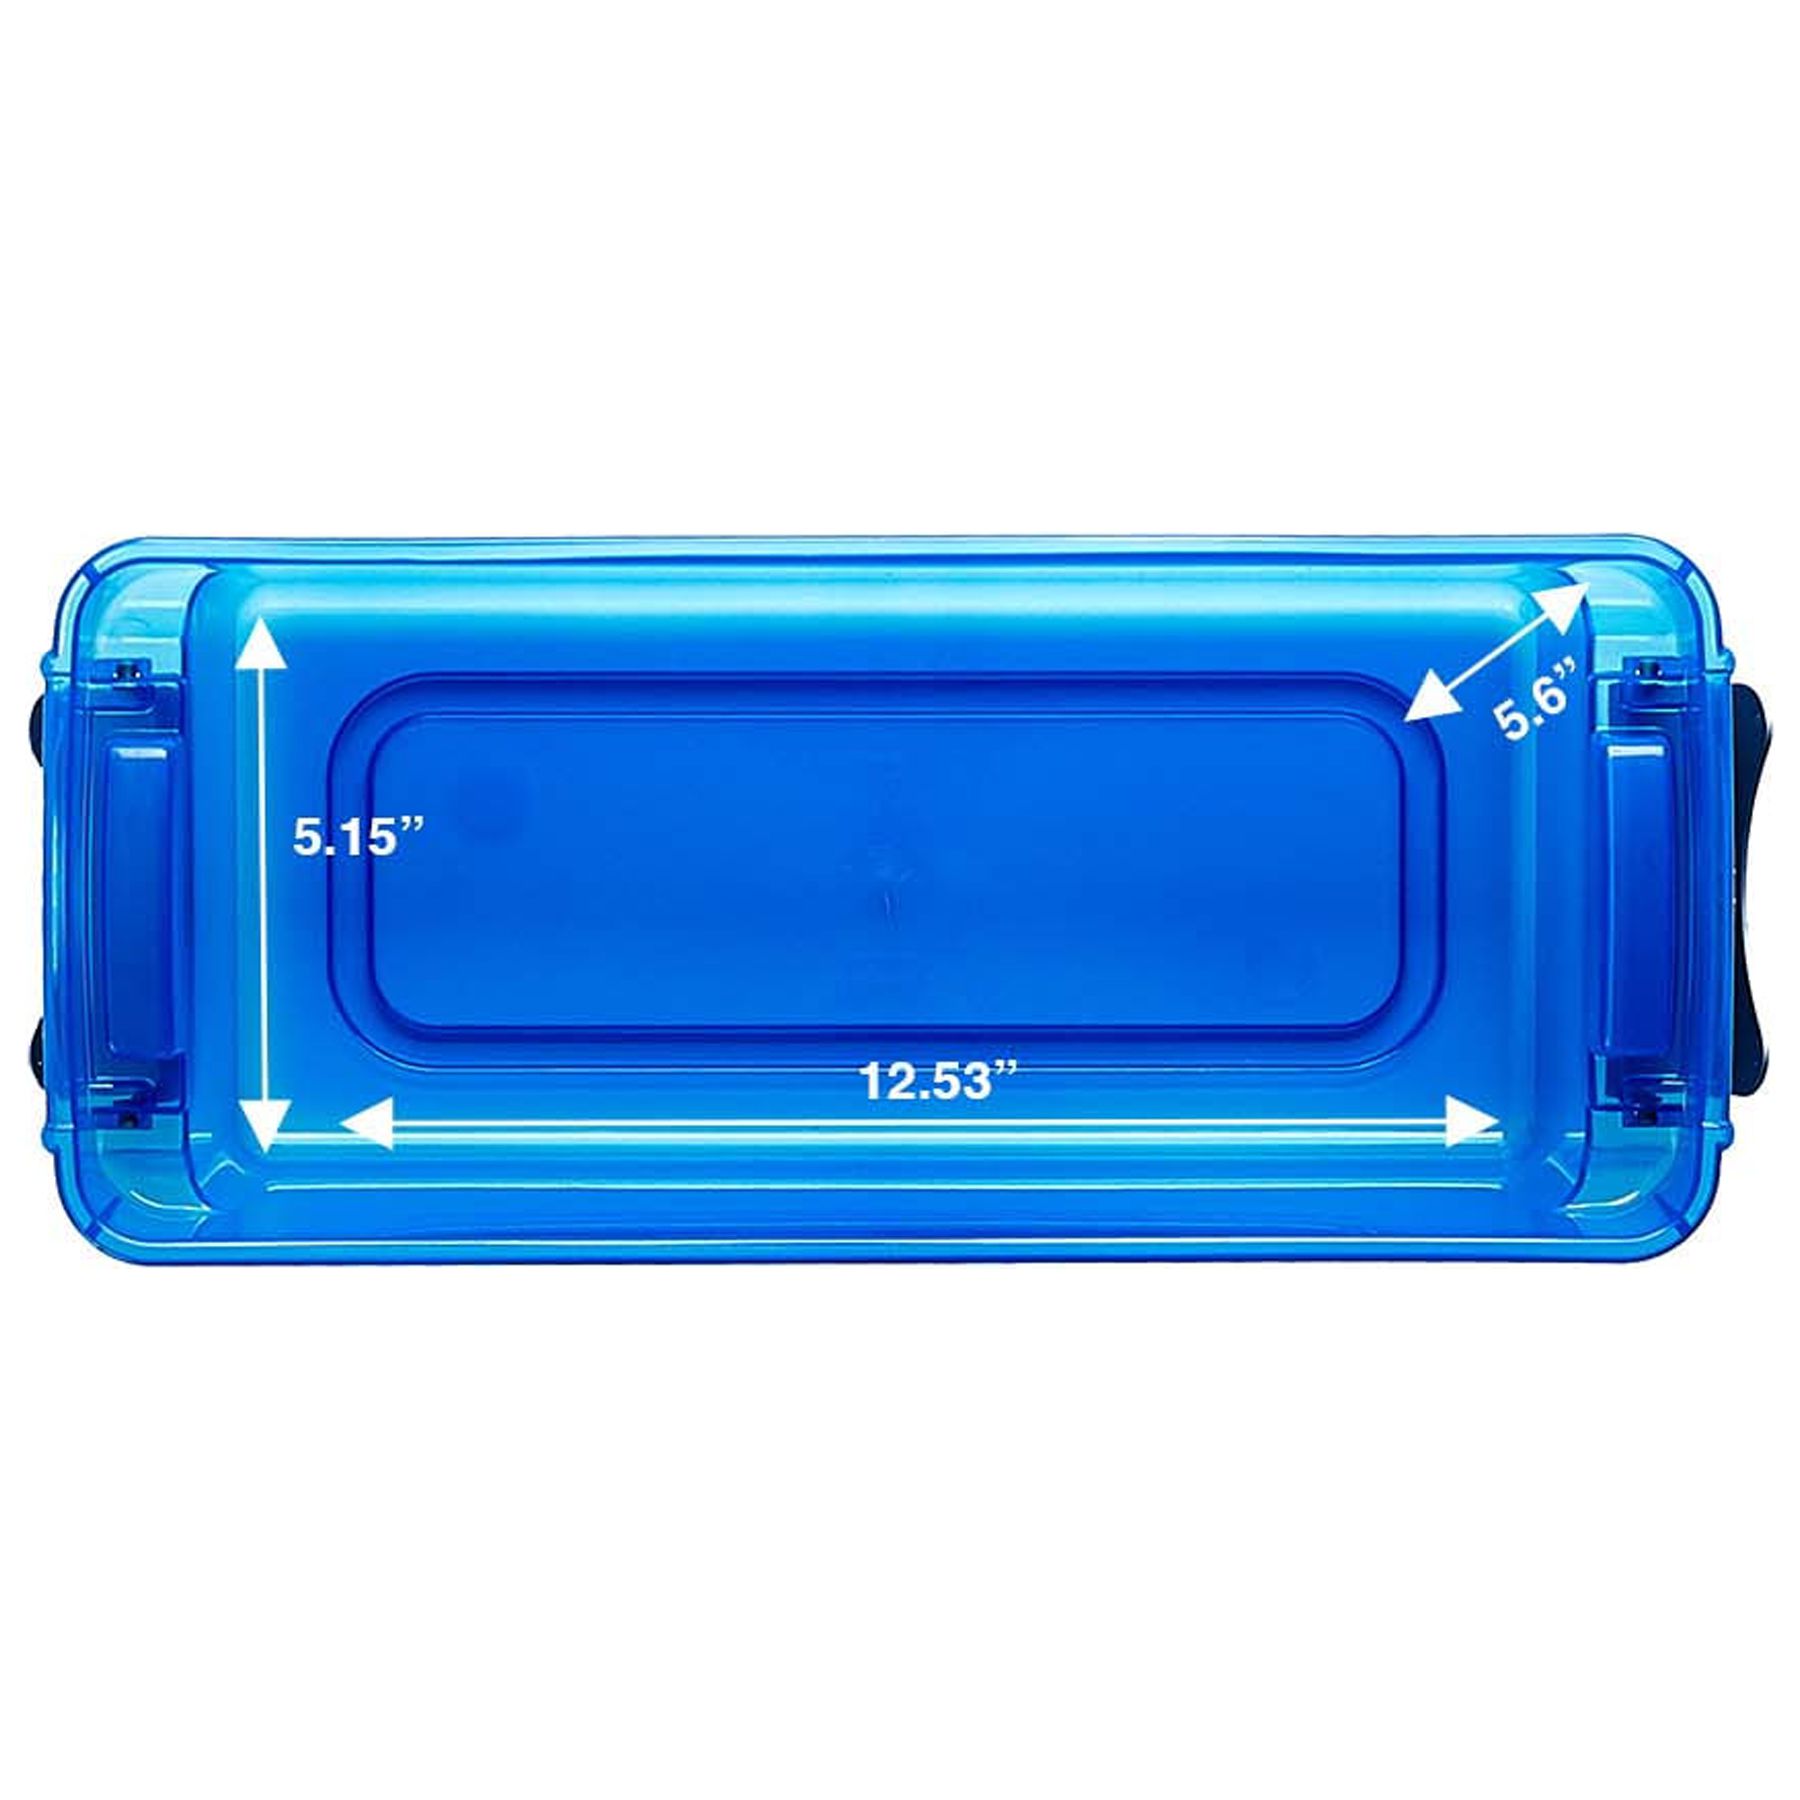 Homz 1.8 Gallon Plastic Storage Container, Blue and Clear - image 3 of 5